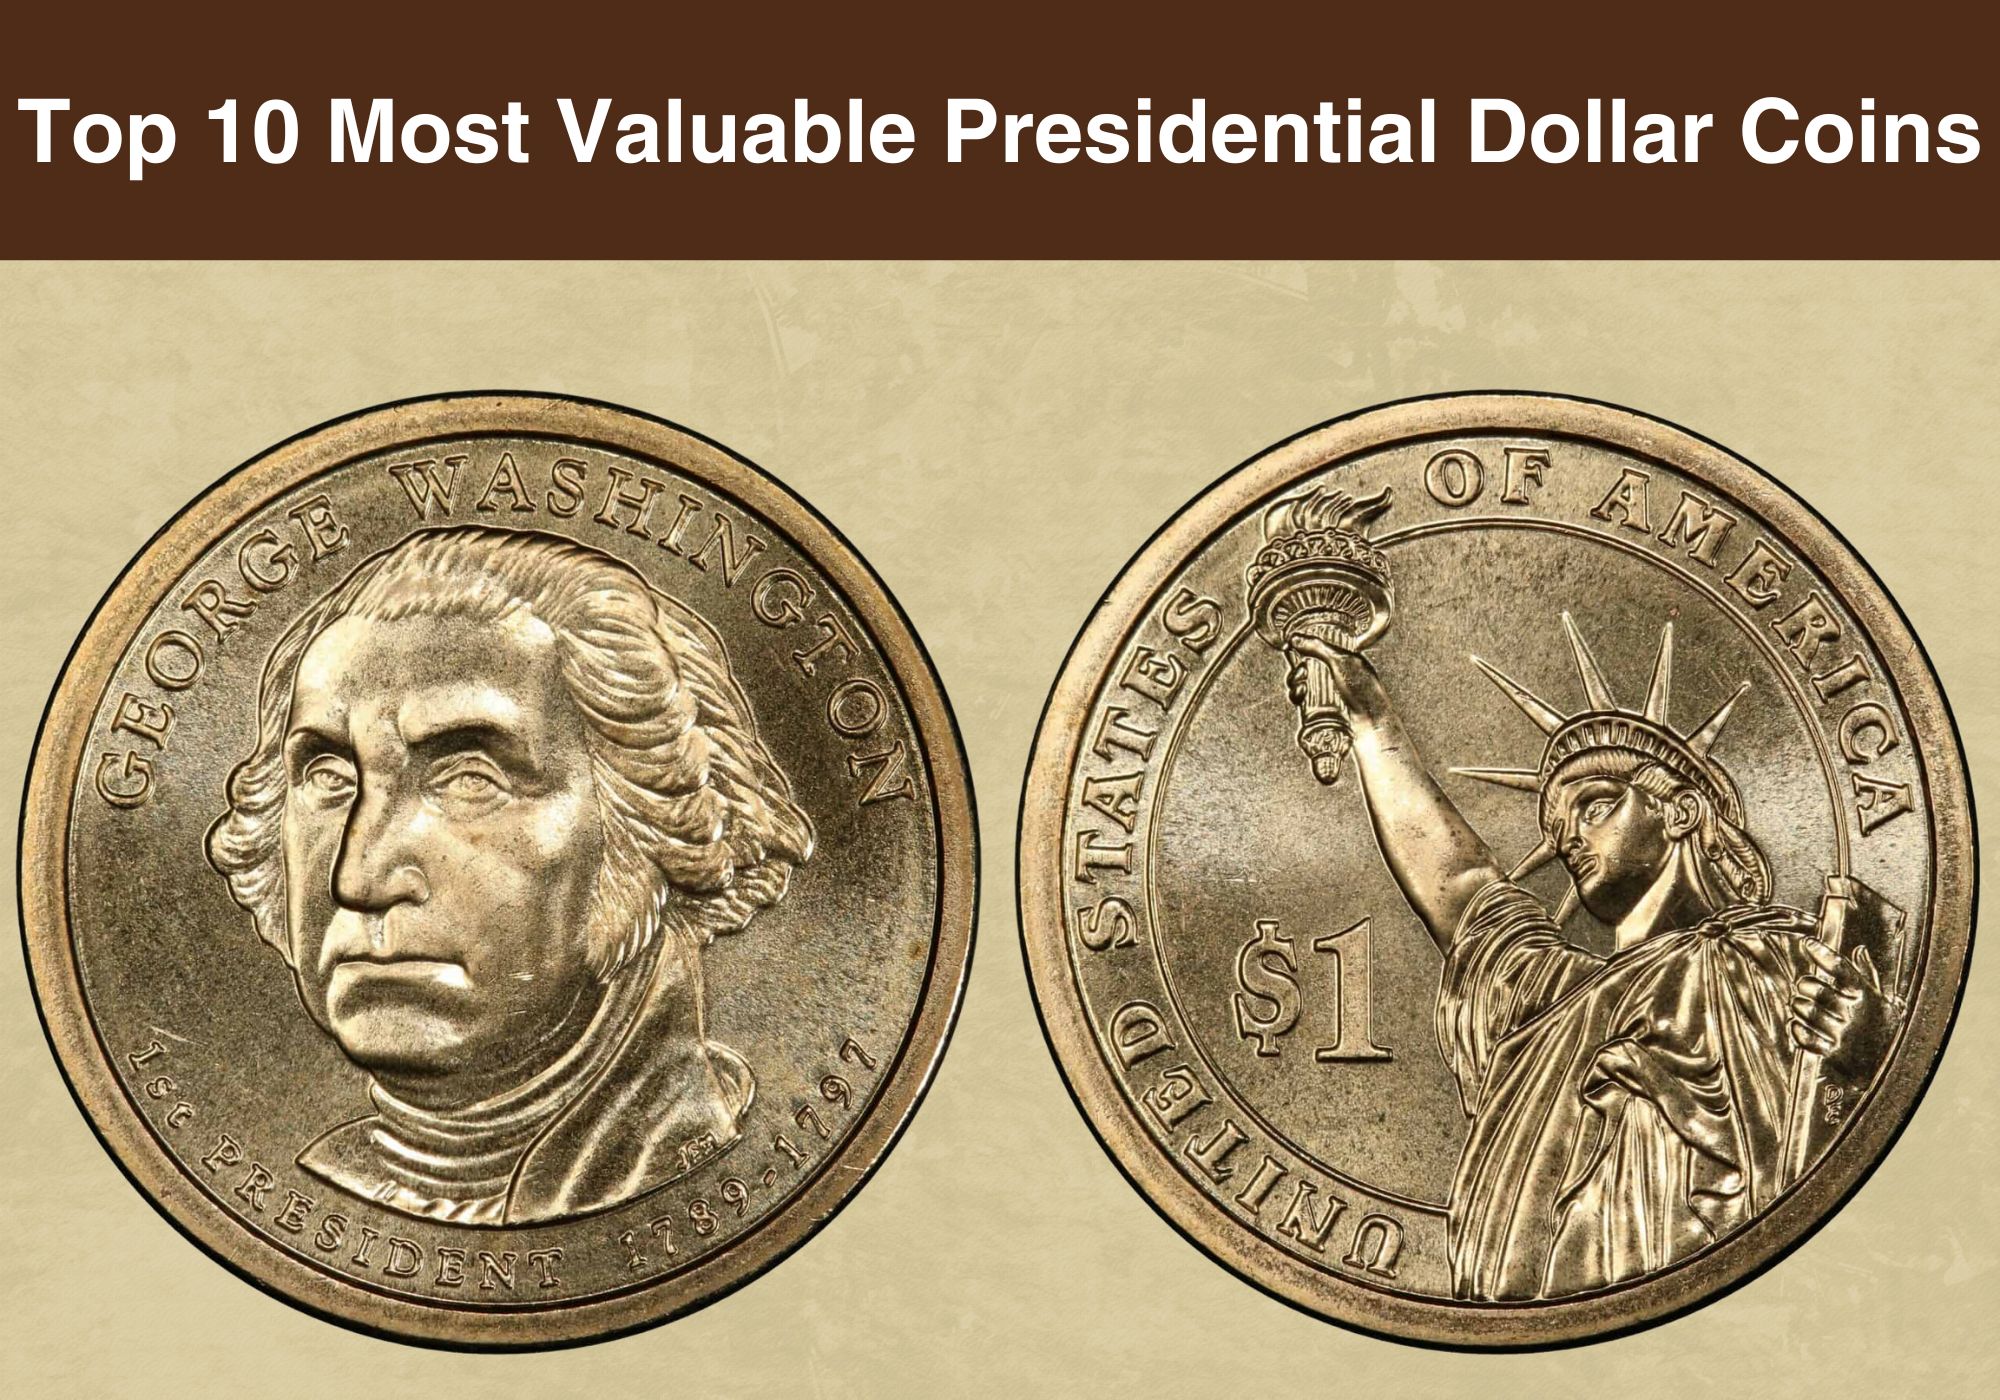 https://www.coinvaluechecker.com/wp-content/uploads/2023/06/Top-10-Most-Valuable-Presidential-Dollar-Coins.jpg